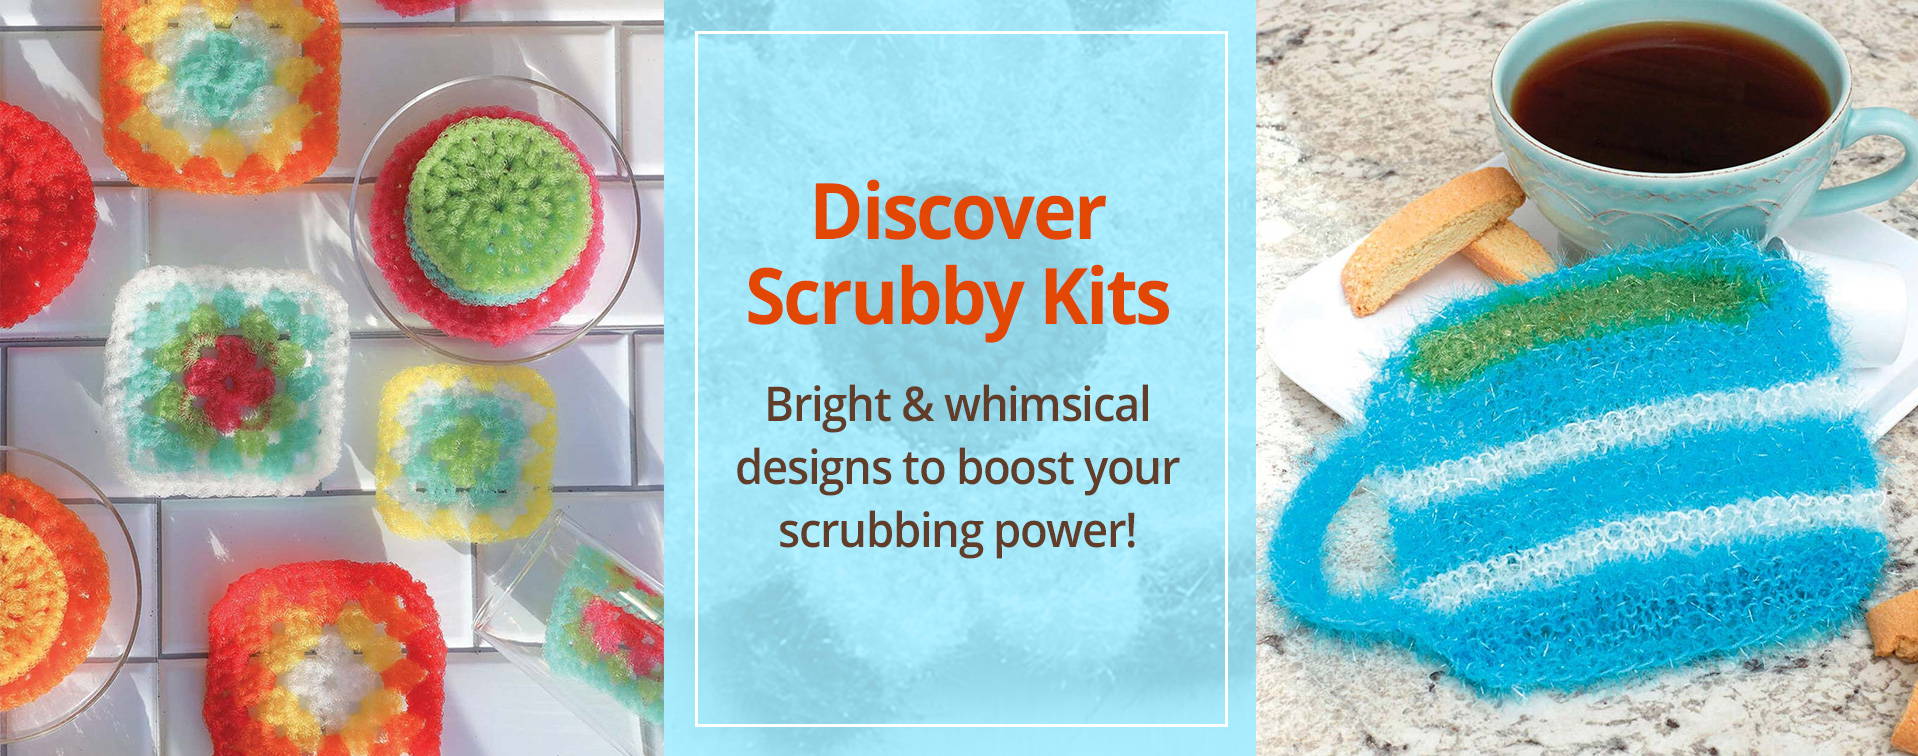 Discover Scrubby Kits Bright and whimsical designs to boost your scrubbing power!